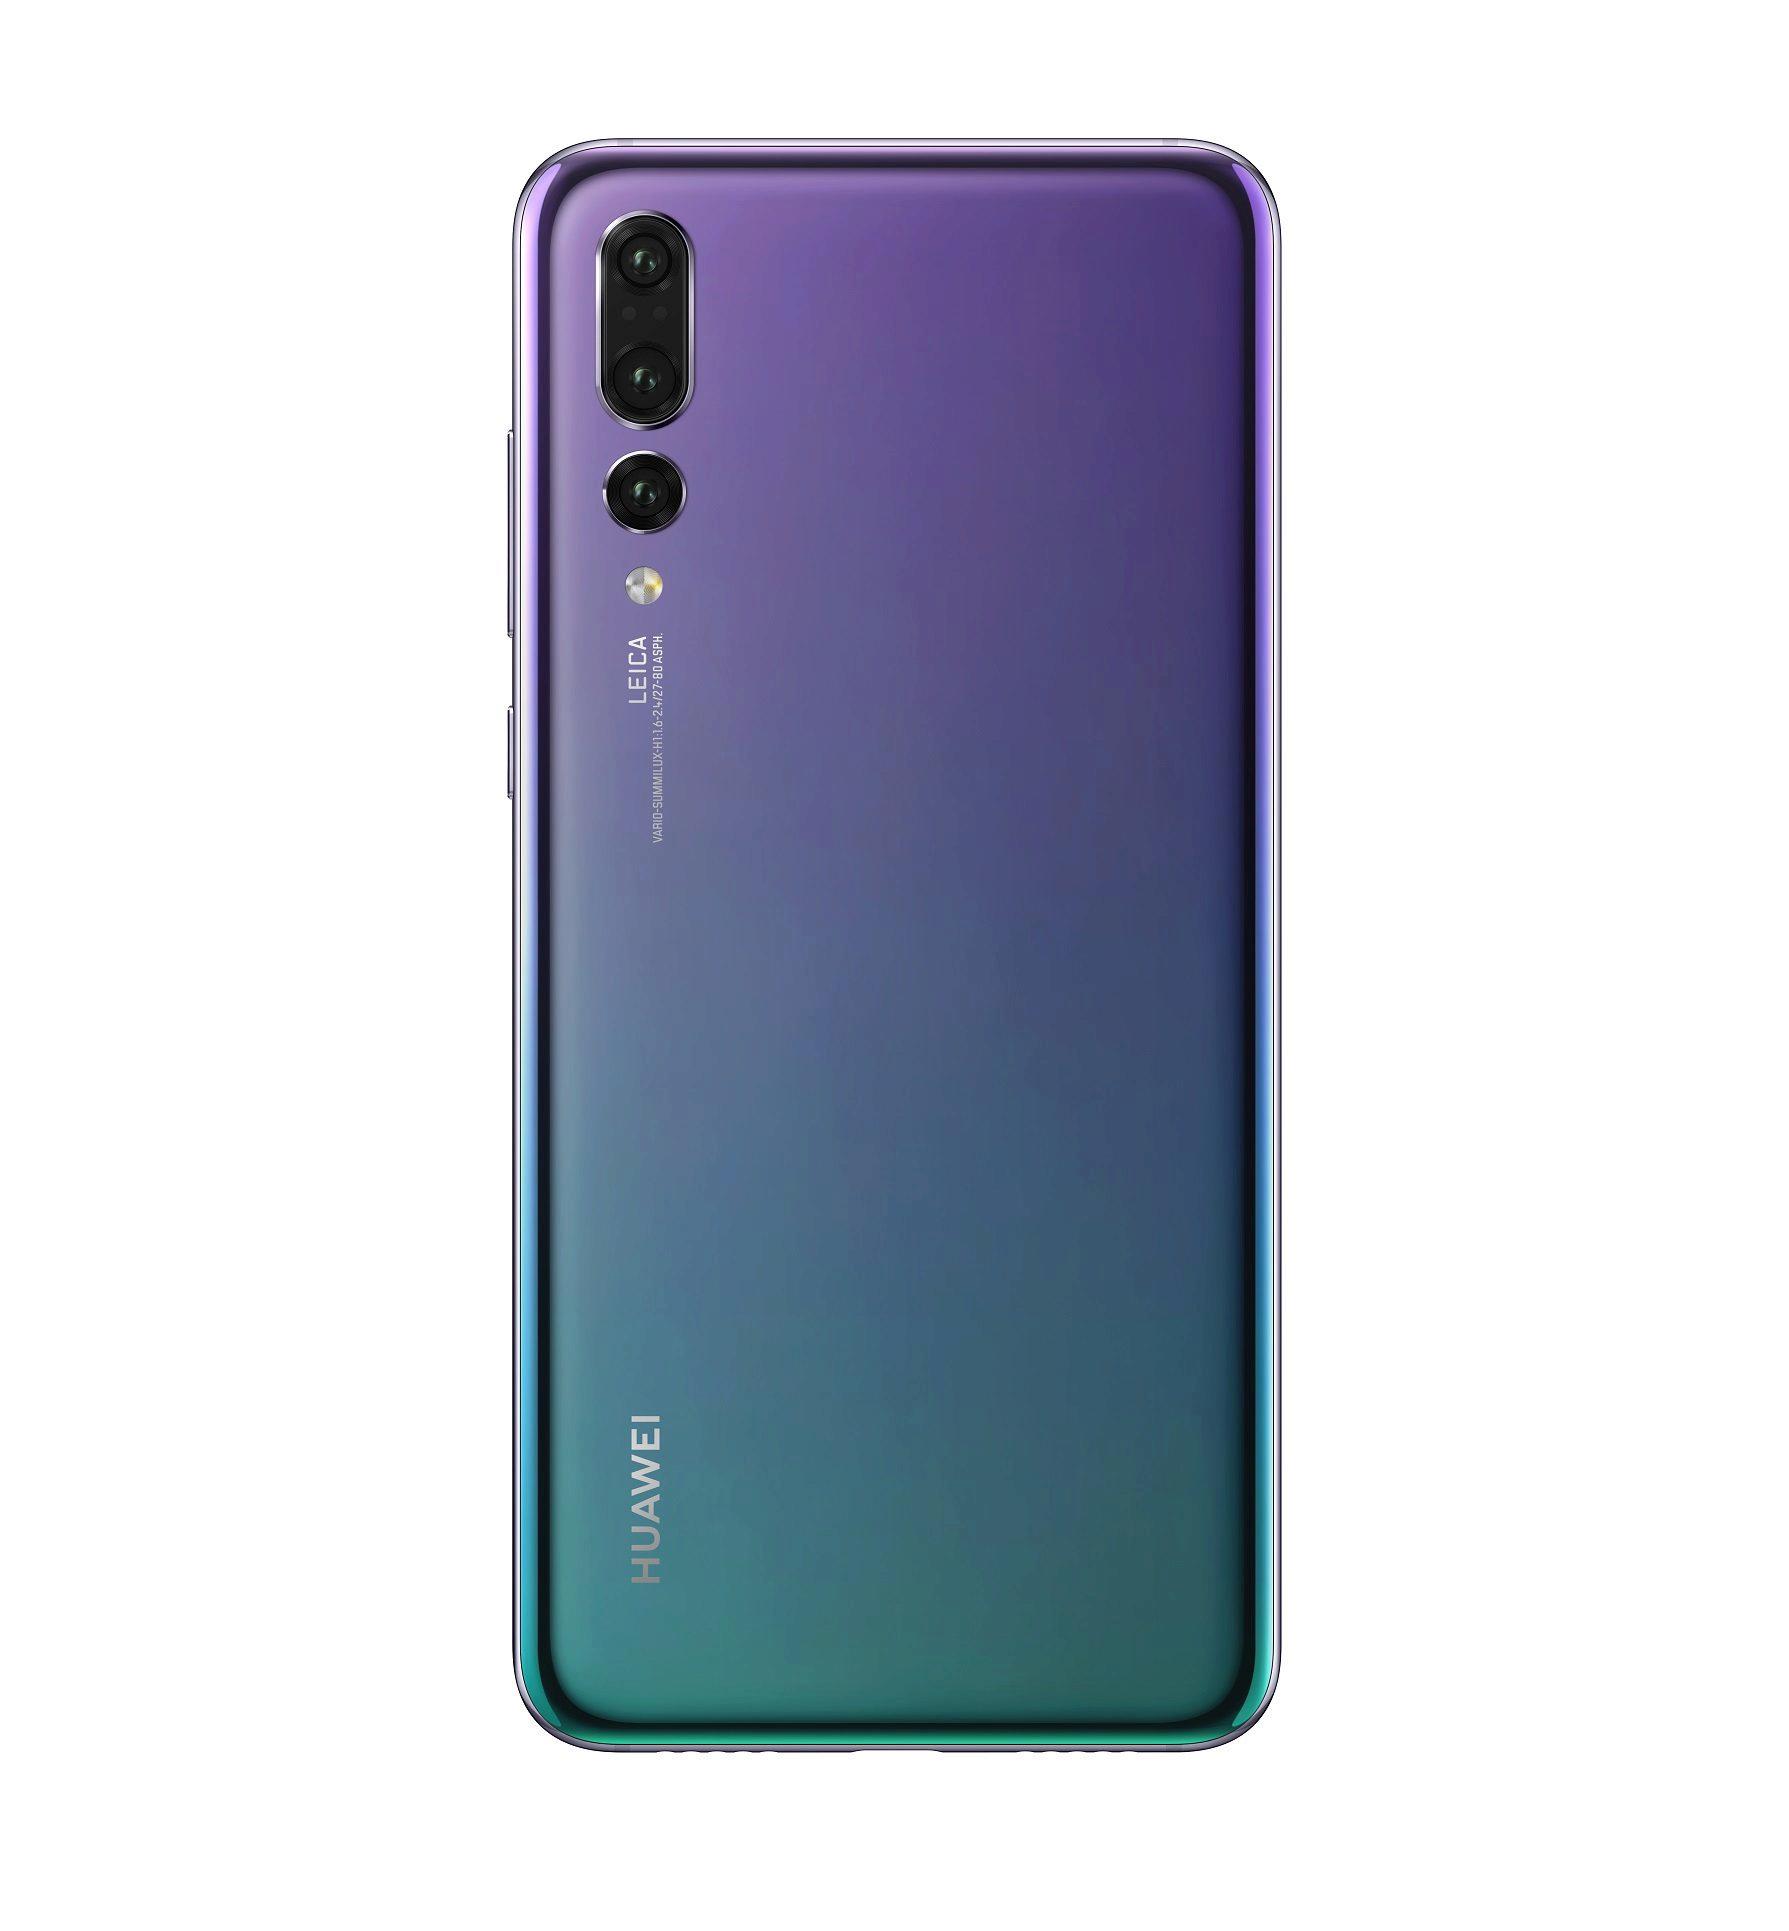 Huawei p20 android savov the verge